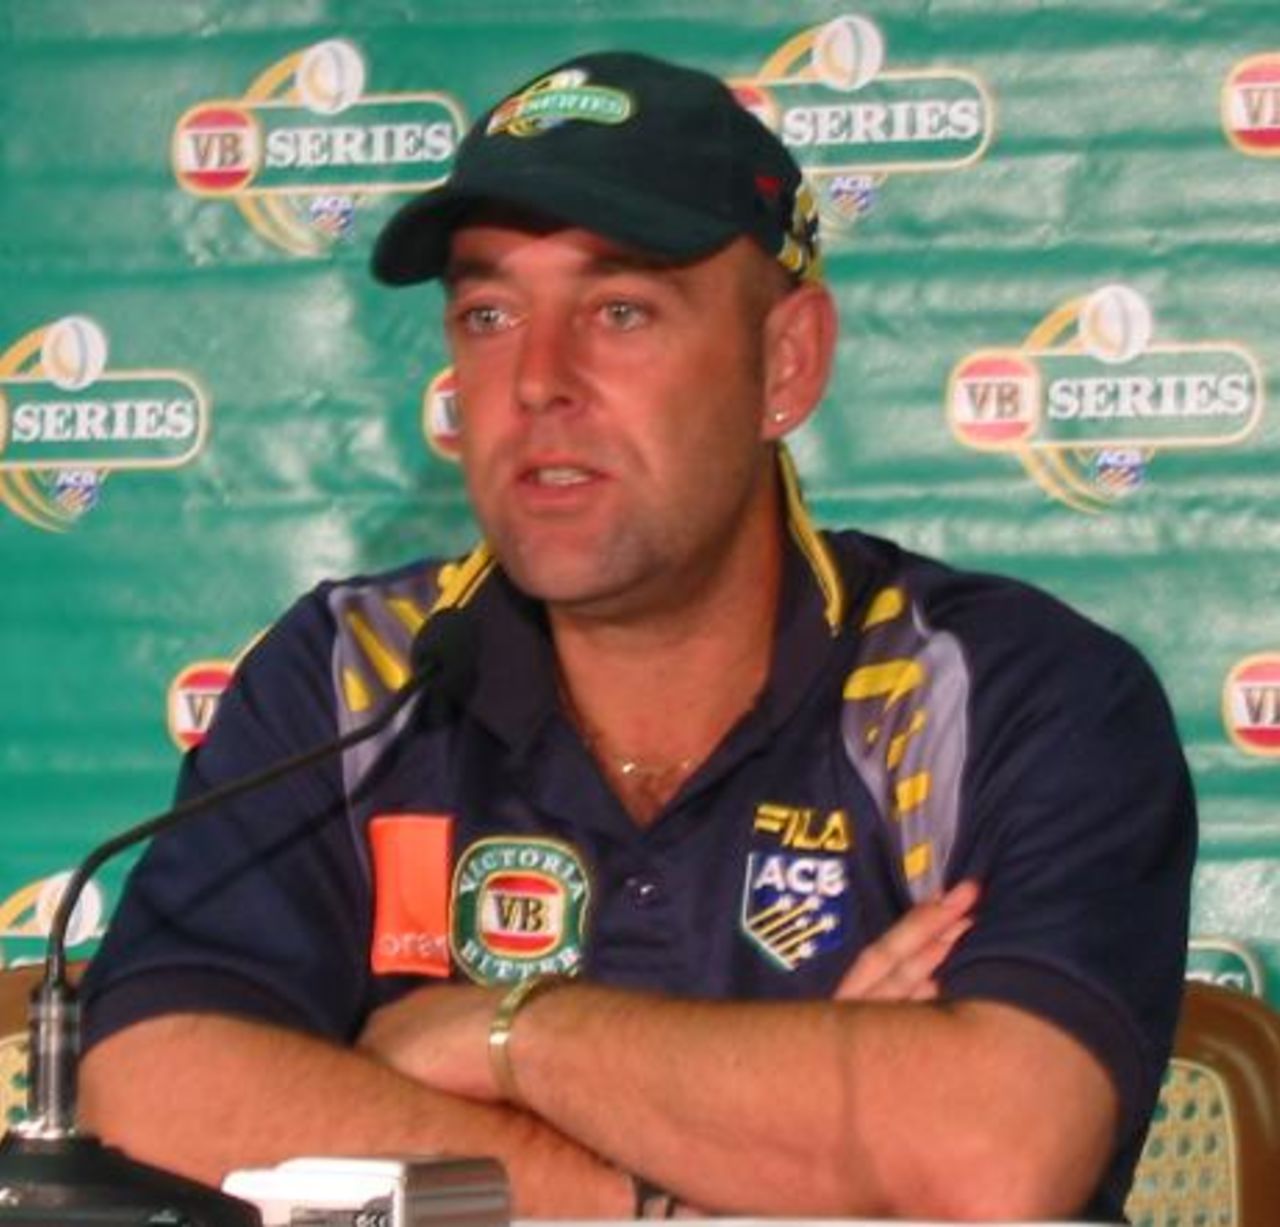 Man of the match Darren Lehmann is pleased after Australia beat Sri Lanka in the VB Series match at Perth